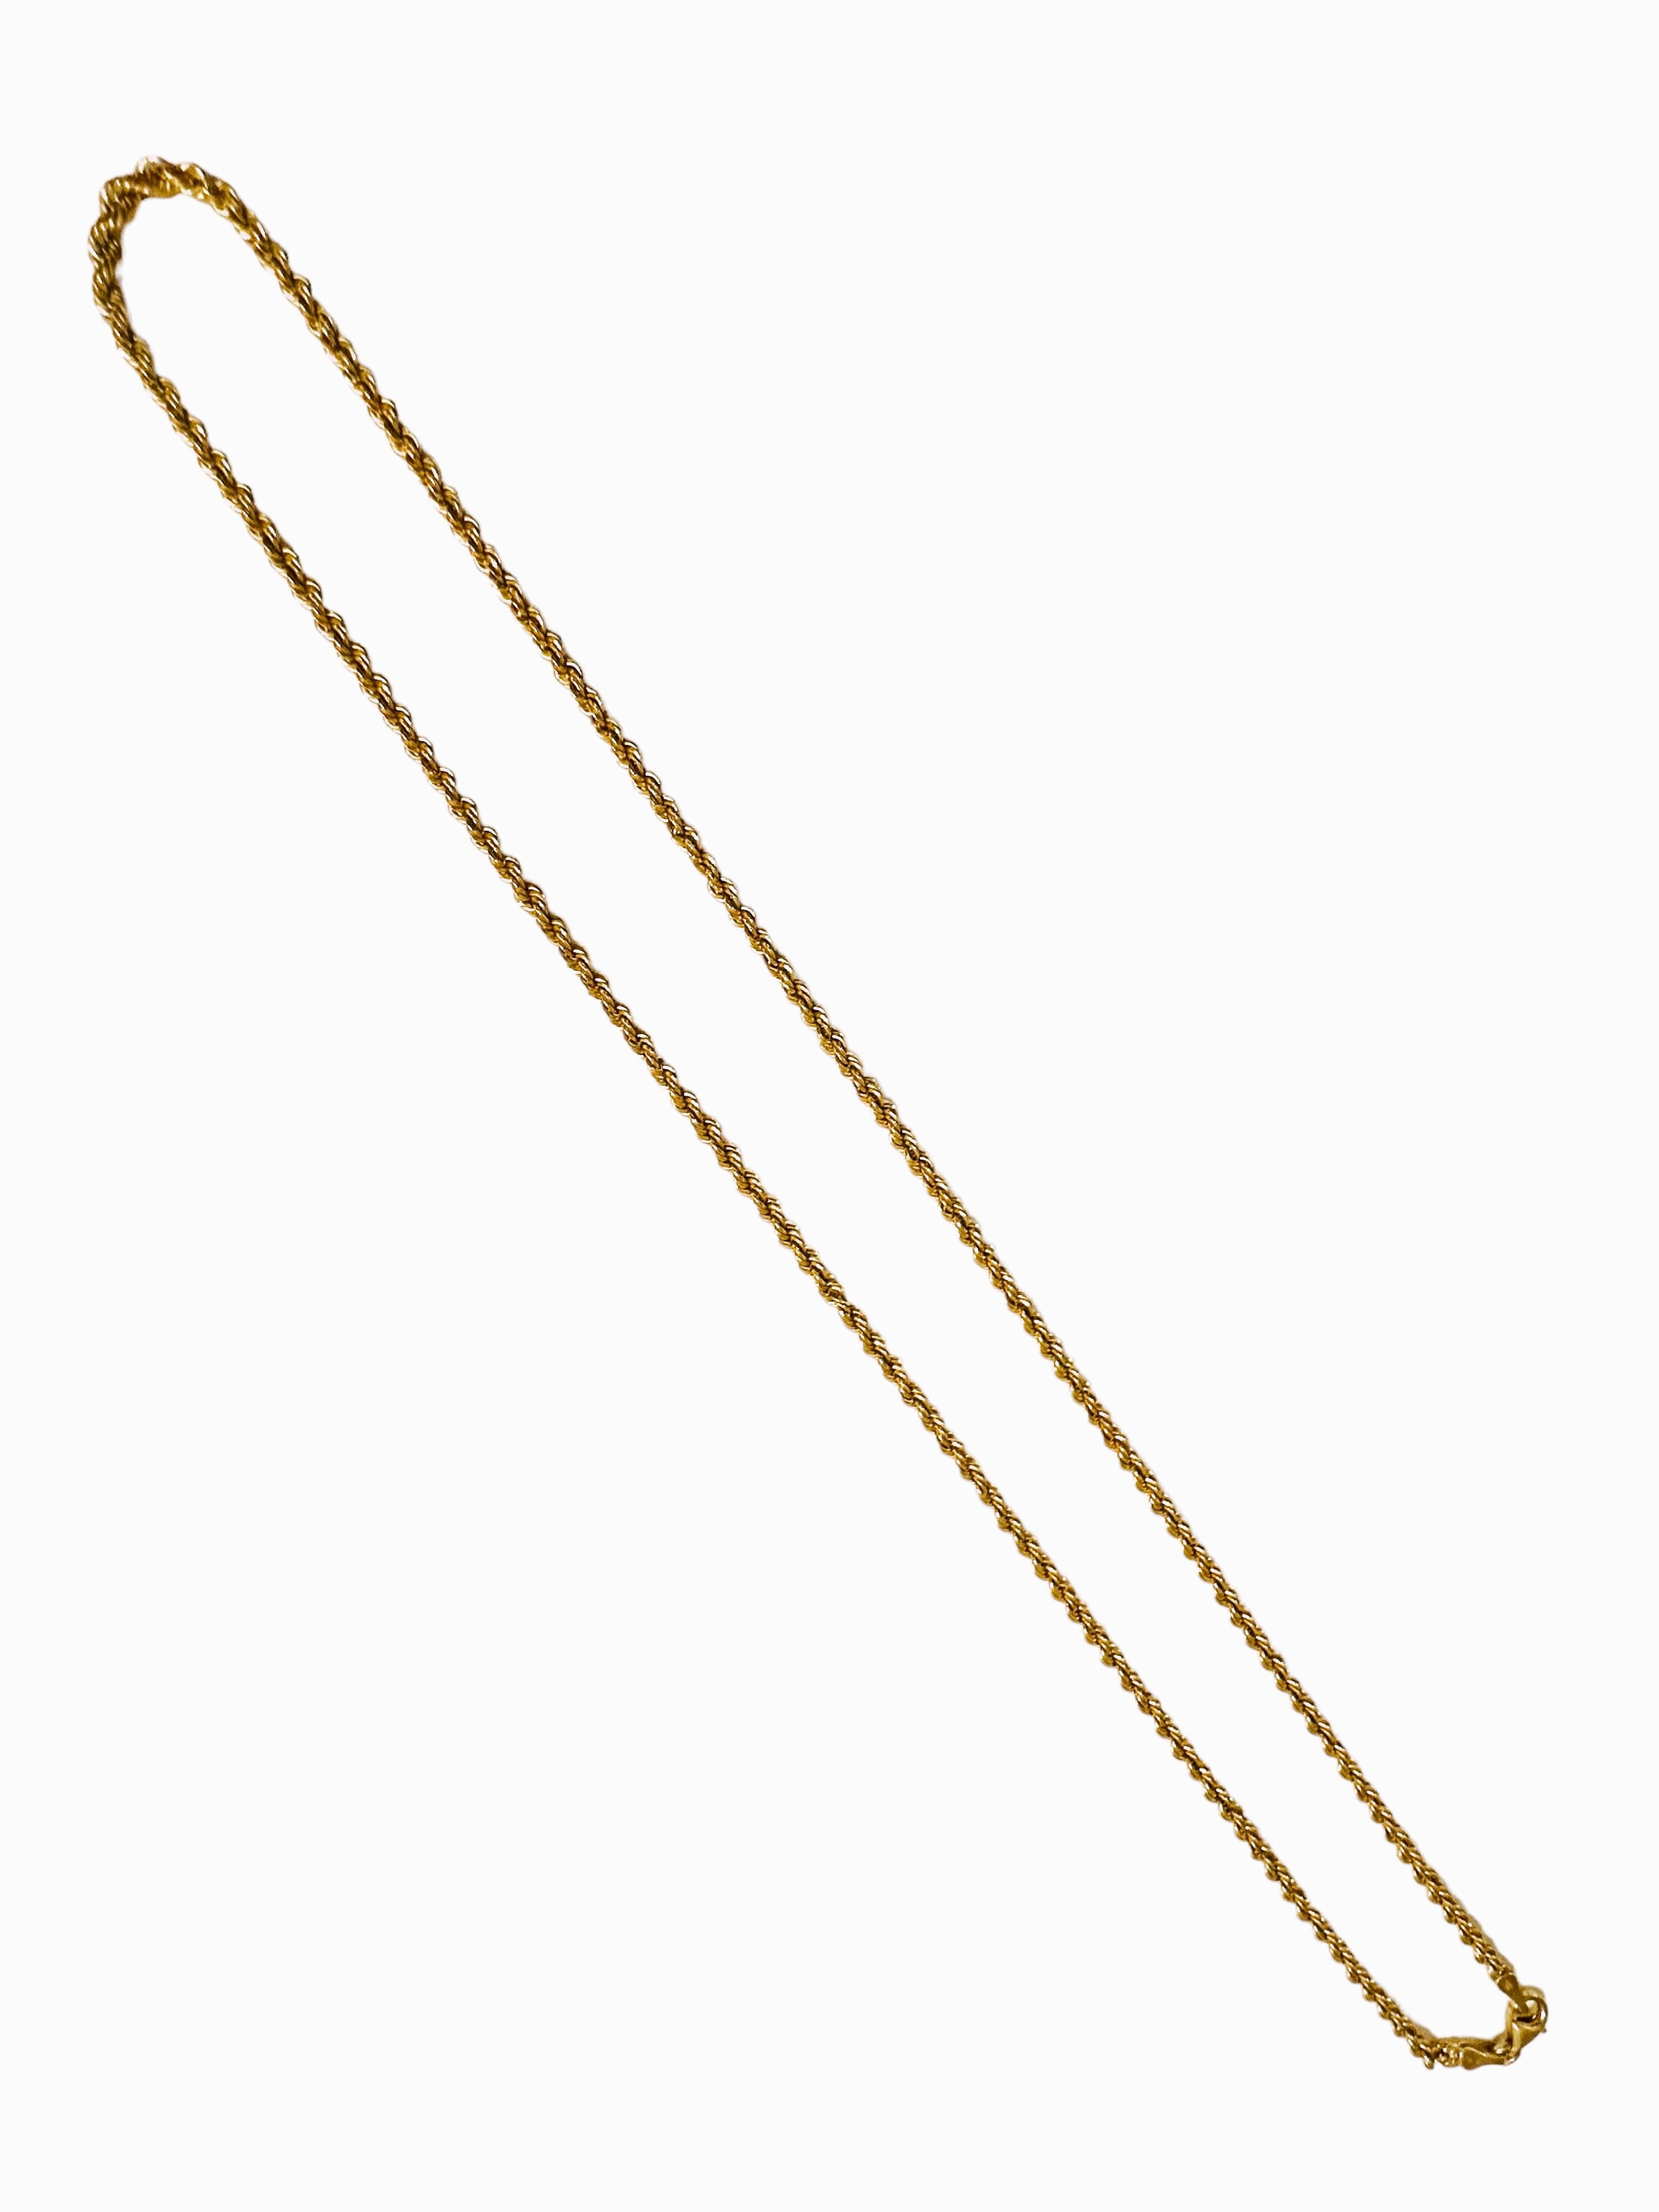 Art Nouveau 18K Yellow Gold Italian Milor Rope Chain 20 Inches 4.34 Grams